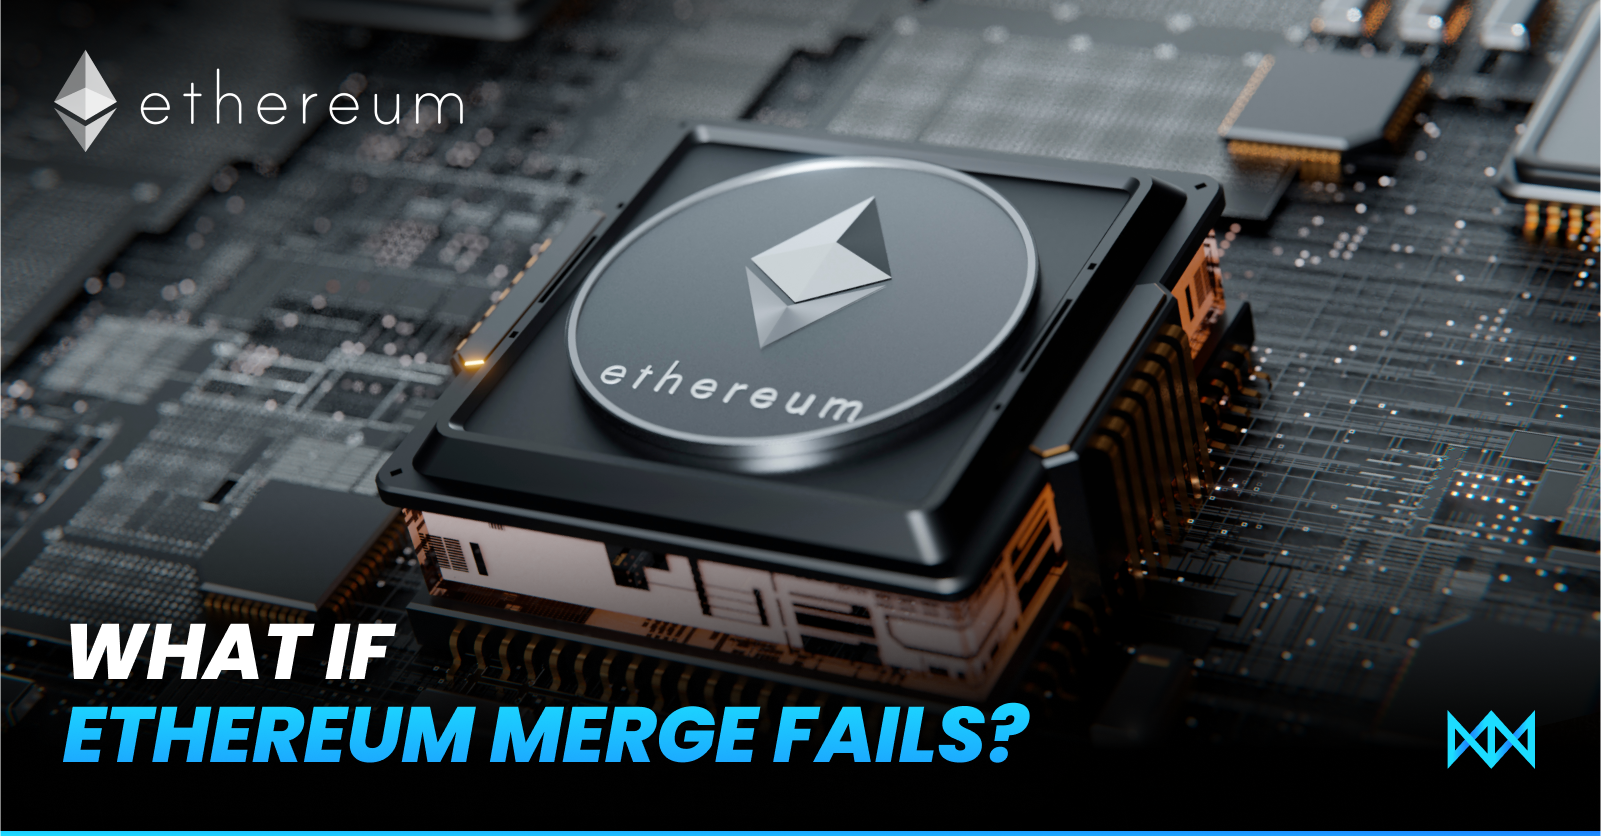 Ethereum Merge in Less Than 24 Hours: What If It Fails?